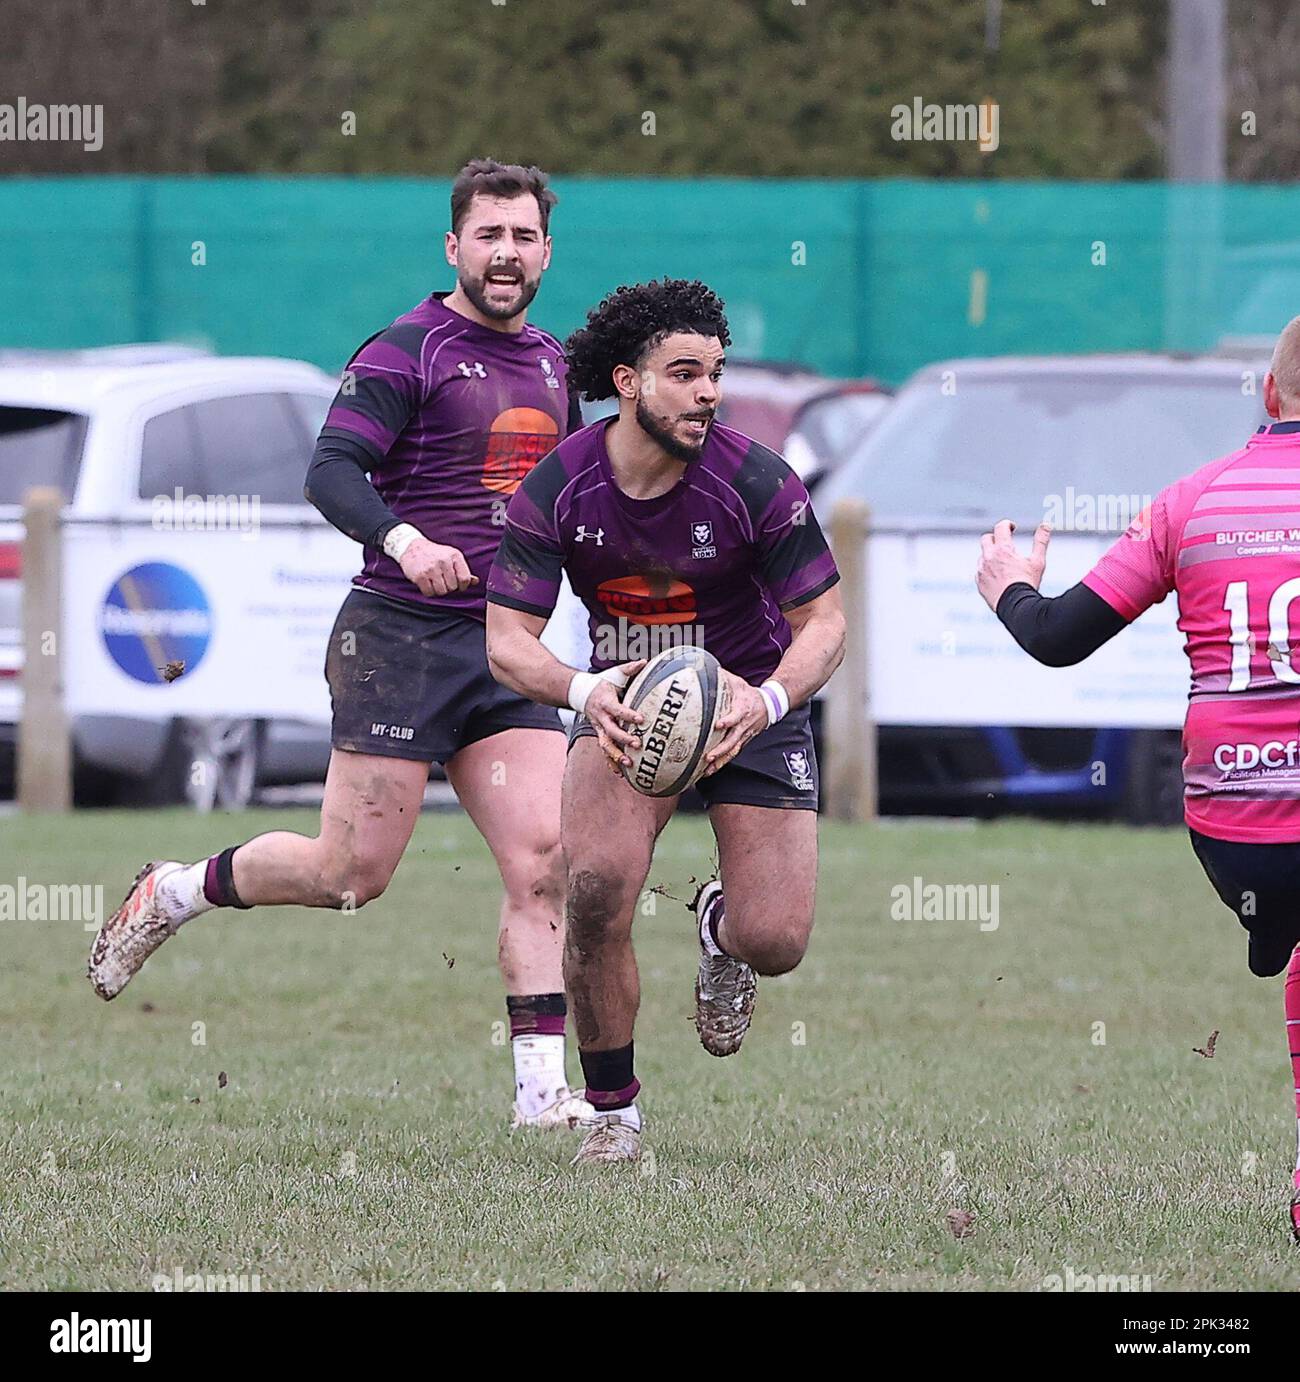 01.04.2023   Leicester, England. Rugby Union.                   Jamel Hamilton makes a break for Lions during the National League Div 2 West match played between Leicester Lions and Stourbridge rfc at the Westleigh Park Stadium, Leicester.  © Phil Hutchinson Stock Photo